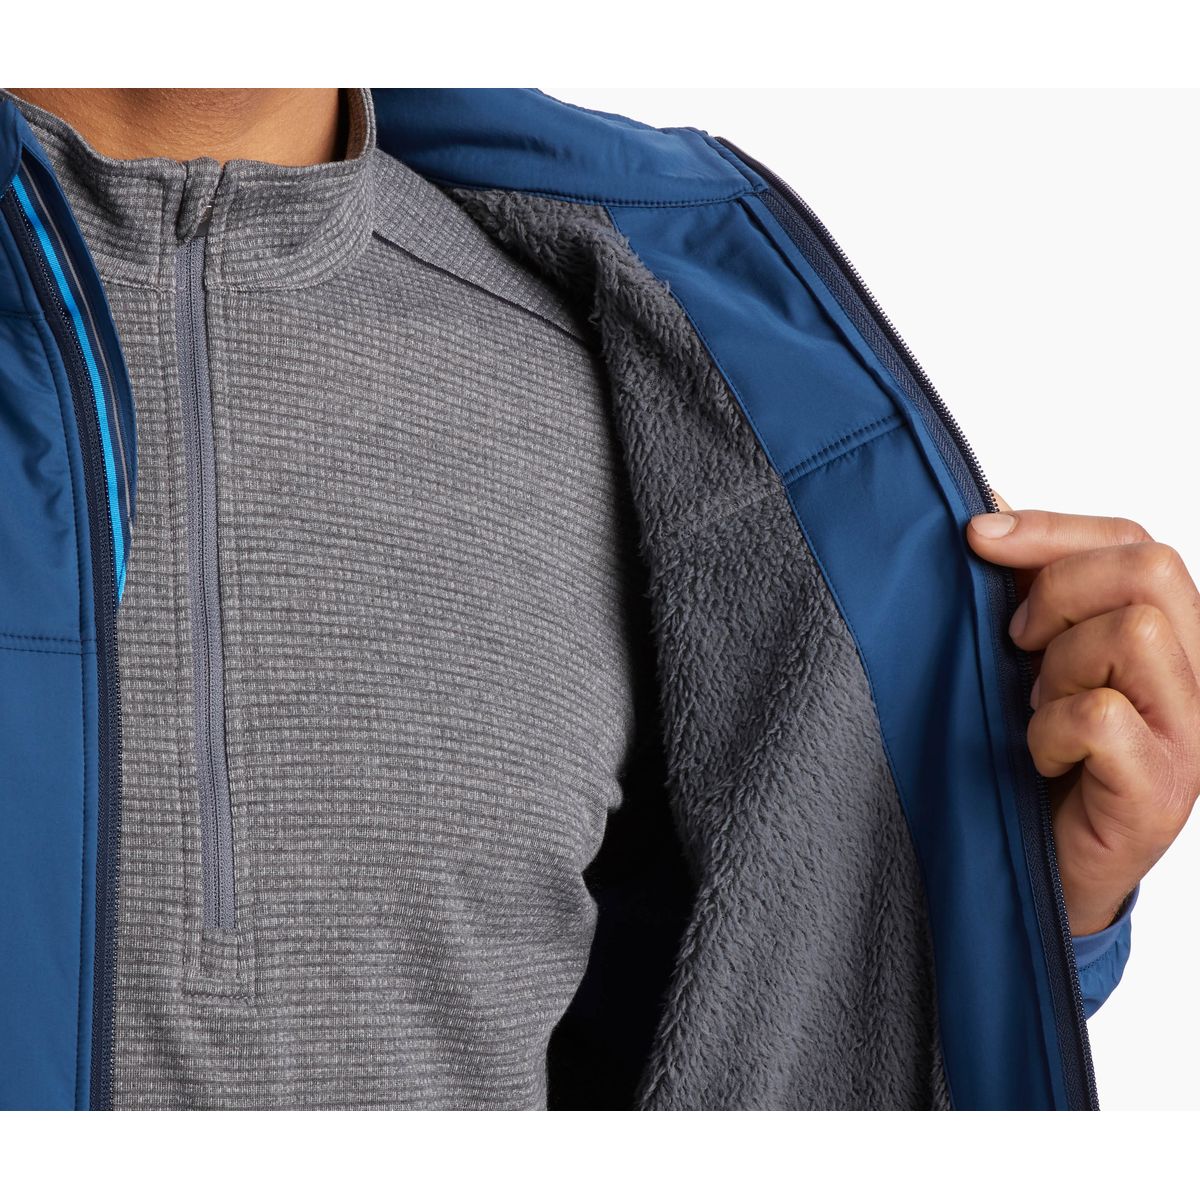 KUHL The One Hoody Review - Active Insulation with Great Looks